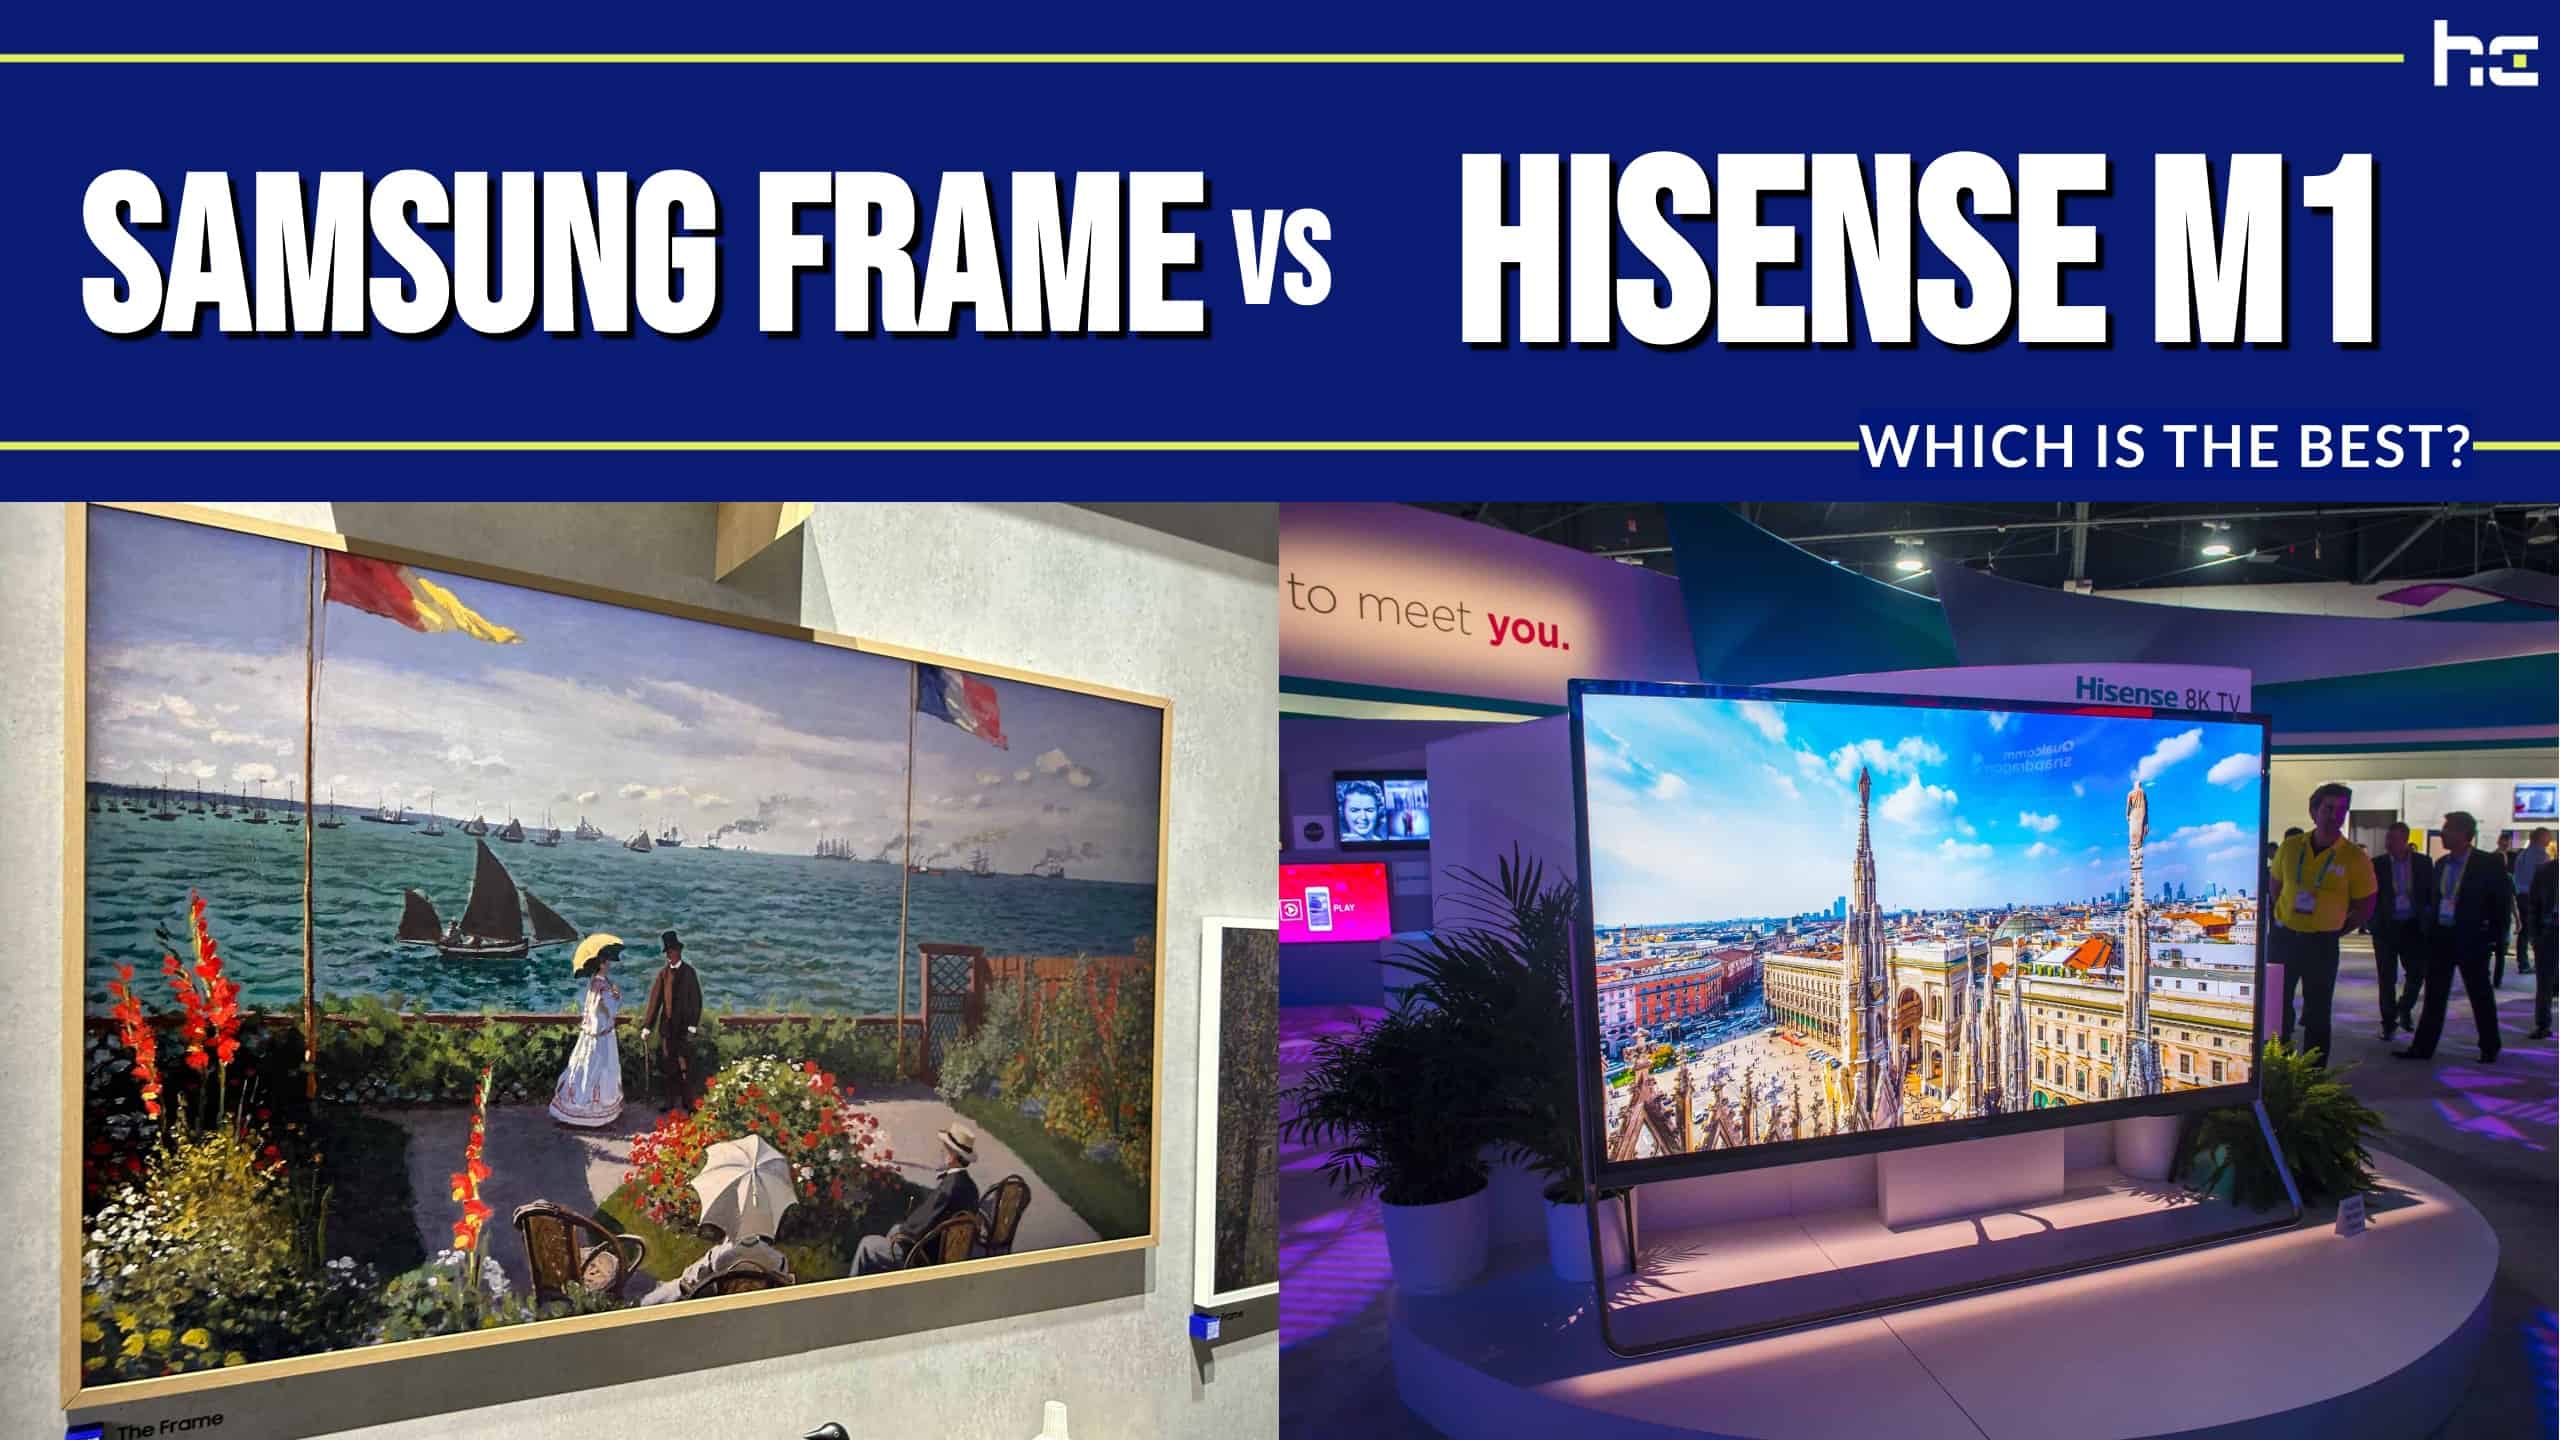 featured image for Samsung Frame vs Hisense M1